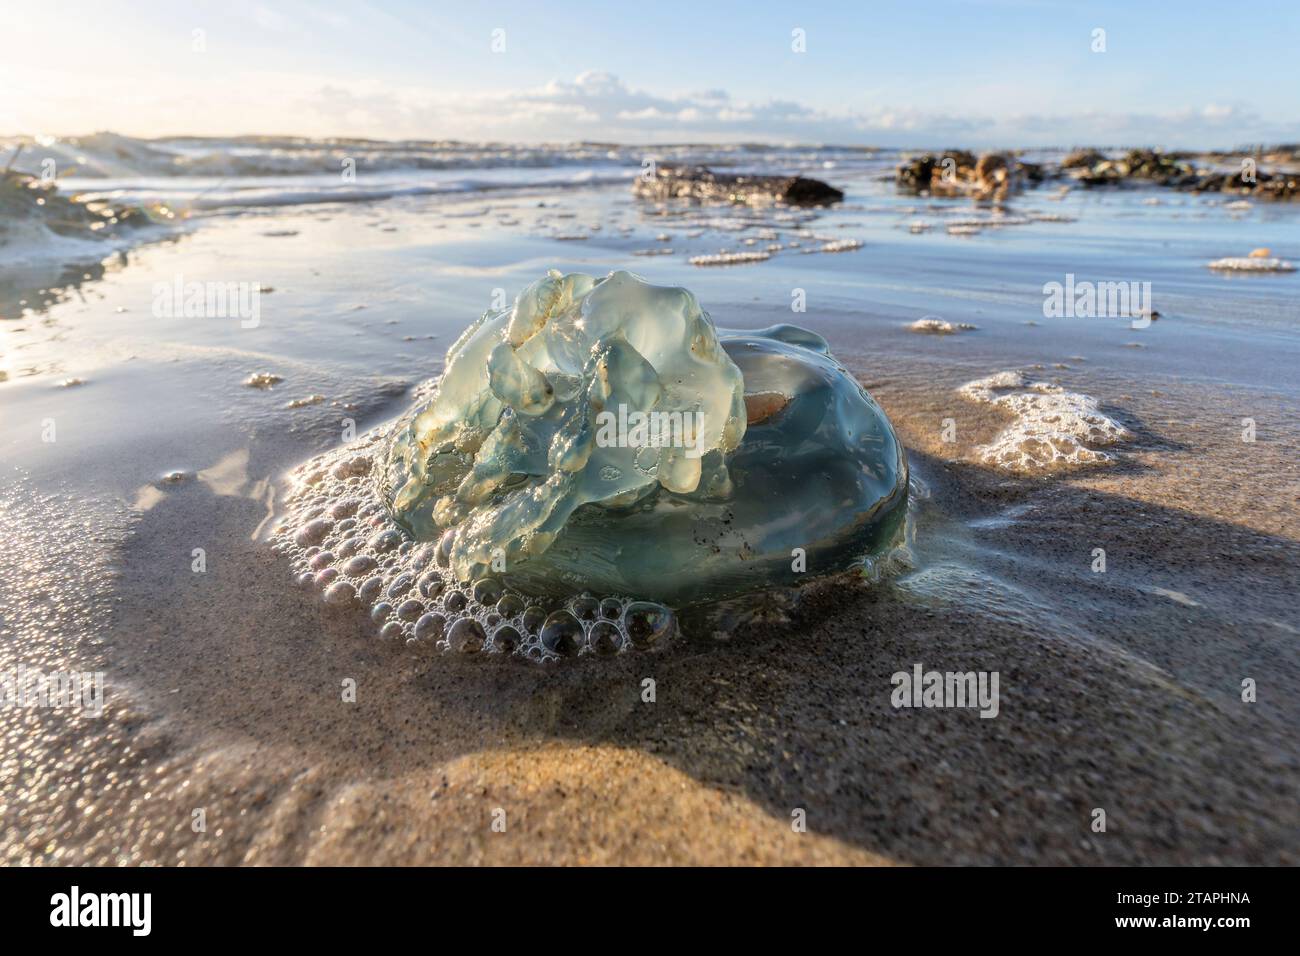 dead blue cabbage bleb (Rhizostoma octopus) stranded on the beach Stock Photo